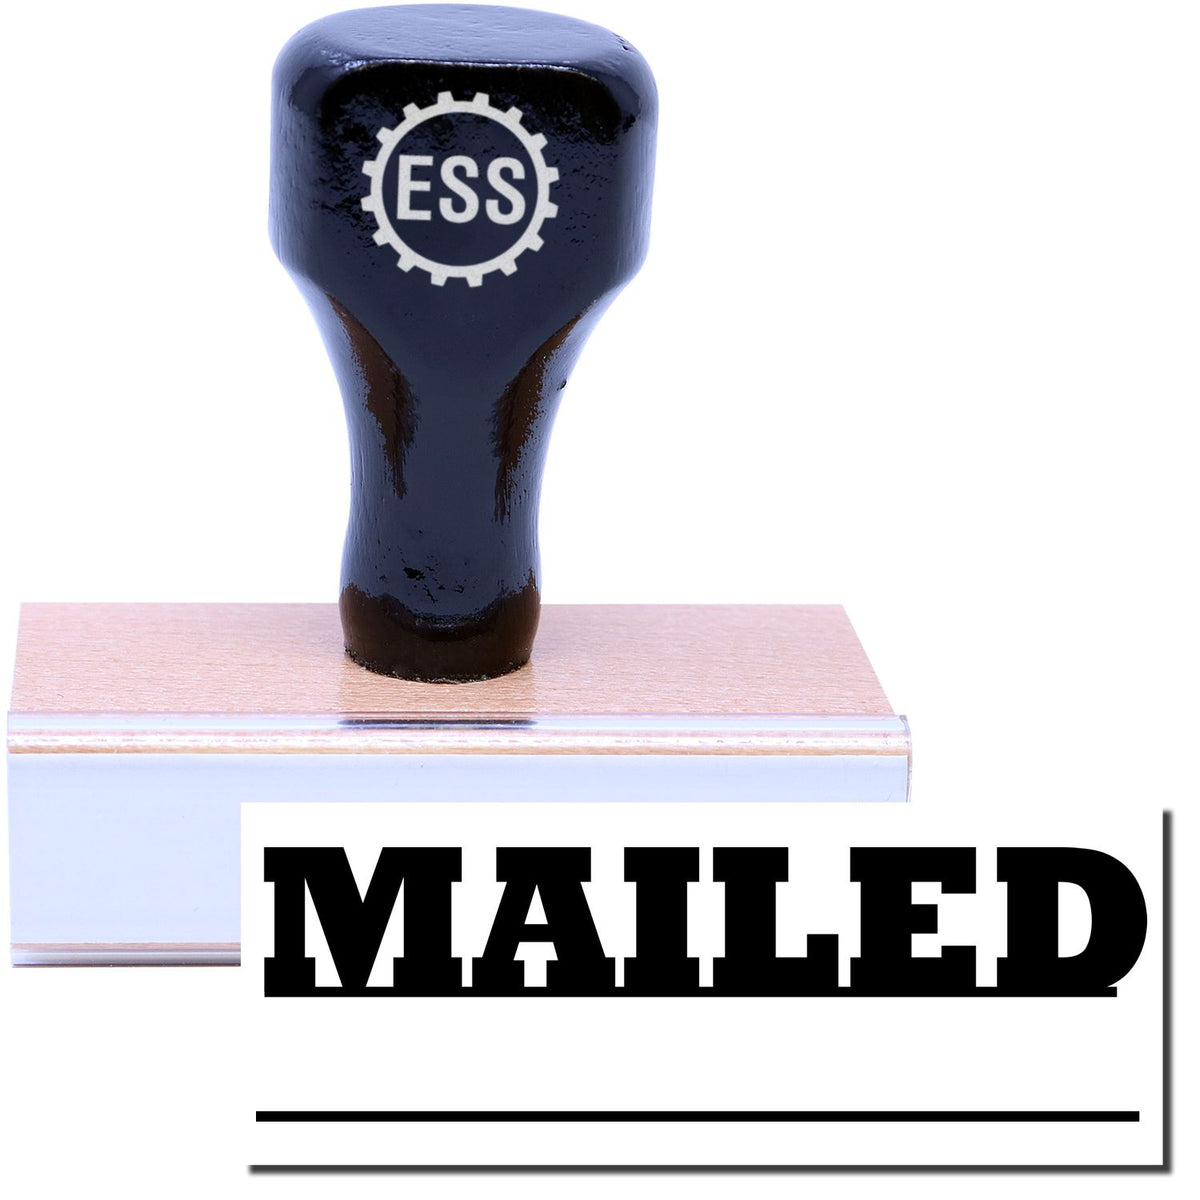 A stock office rubber stamp with a stamped image showing how the text &quot;MAILED&quot; in a bold font with a date line underneath the text is displayed after stamping.